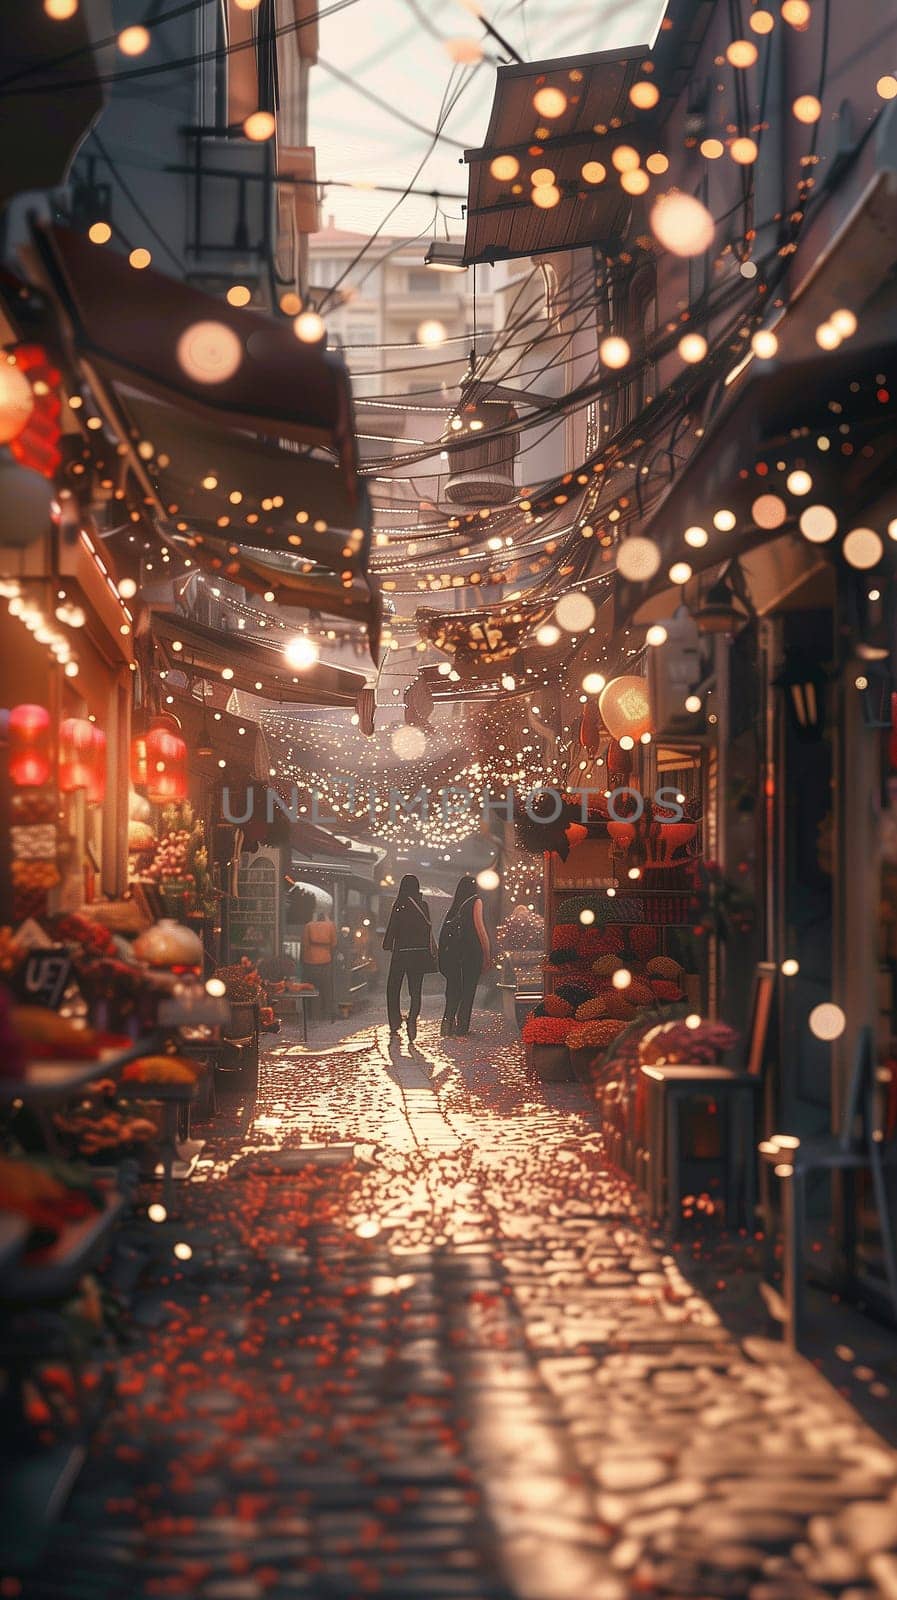 Daylight and lanterns of a very realistic streetscape by NeuroSky